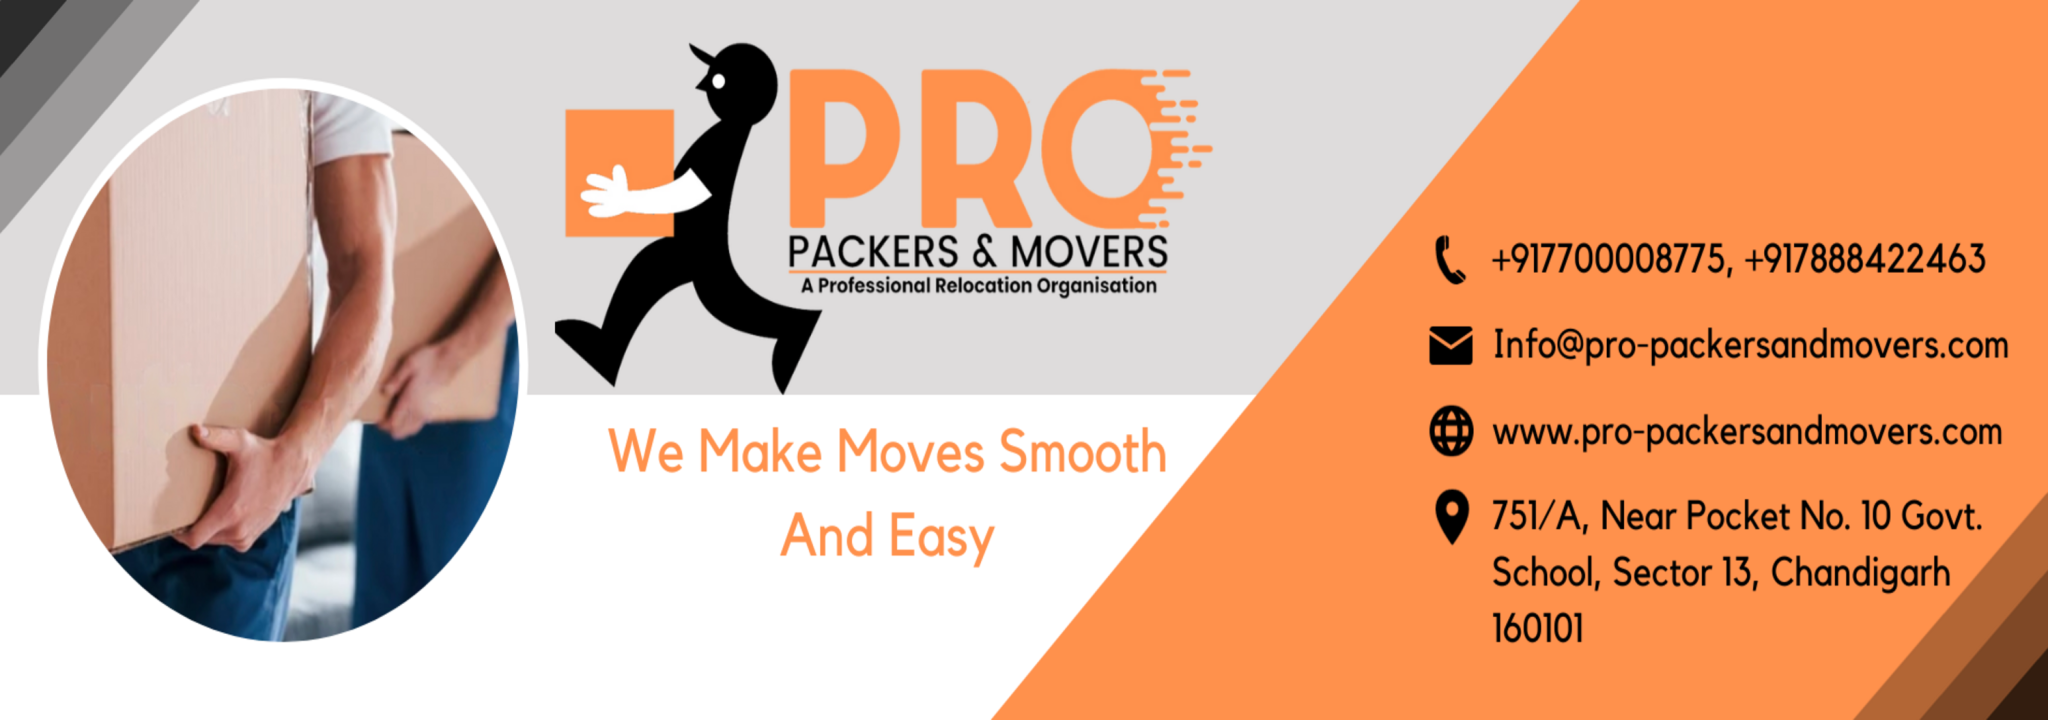 PRO Packers & Movers on Tumblr